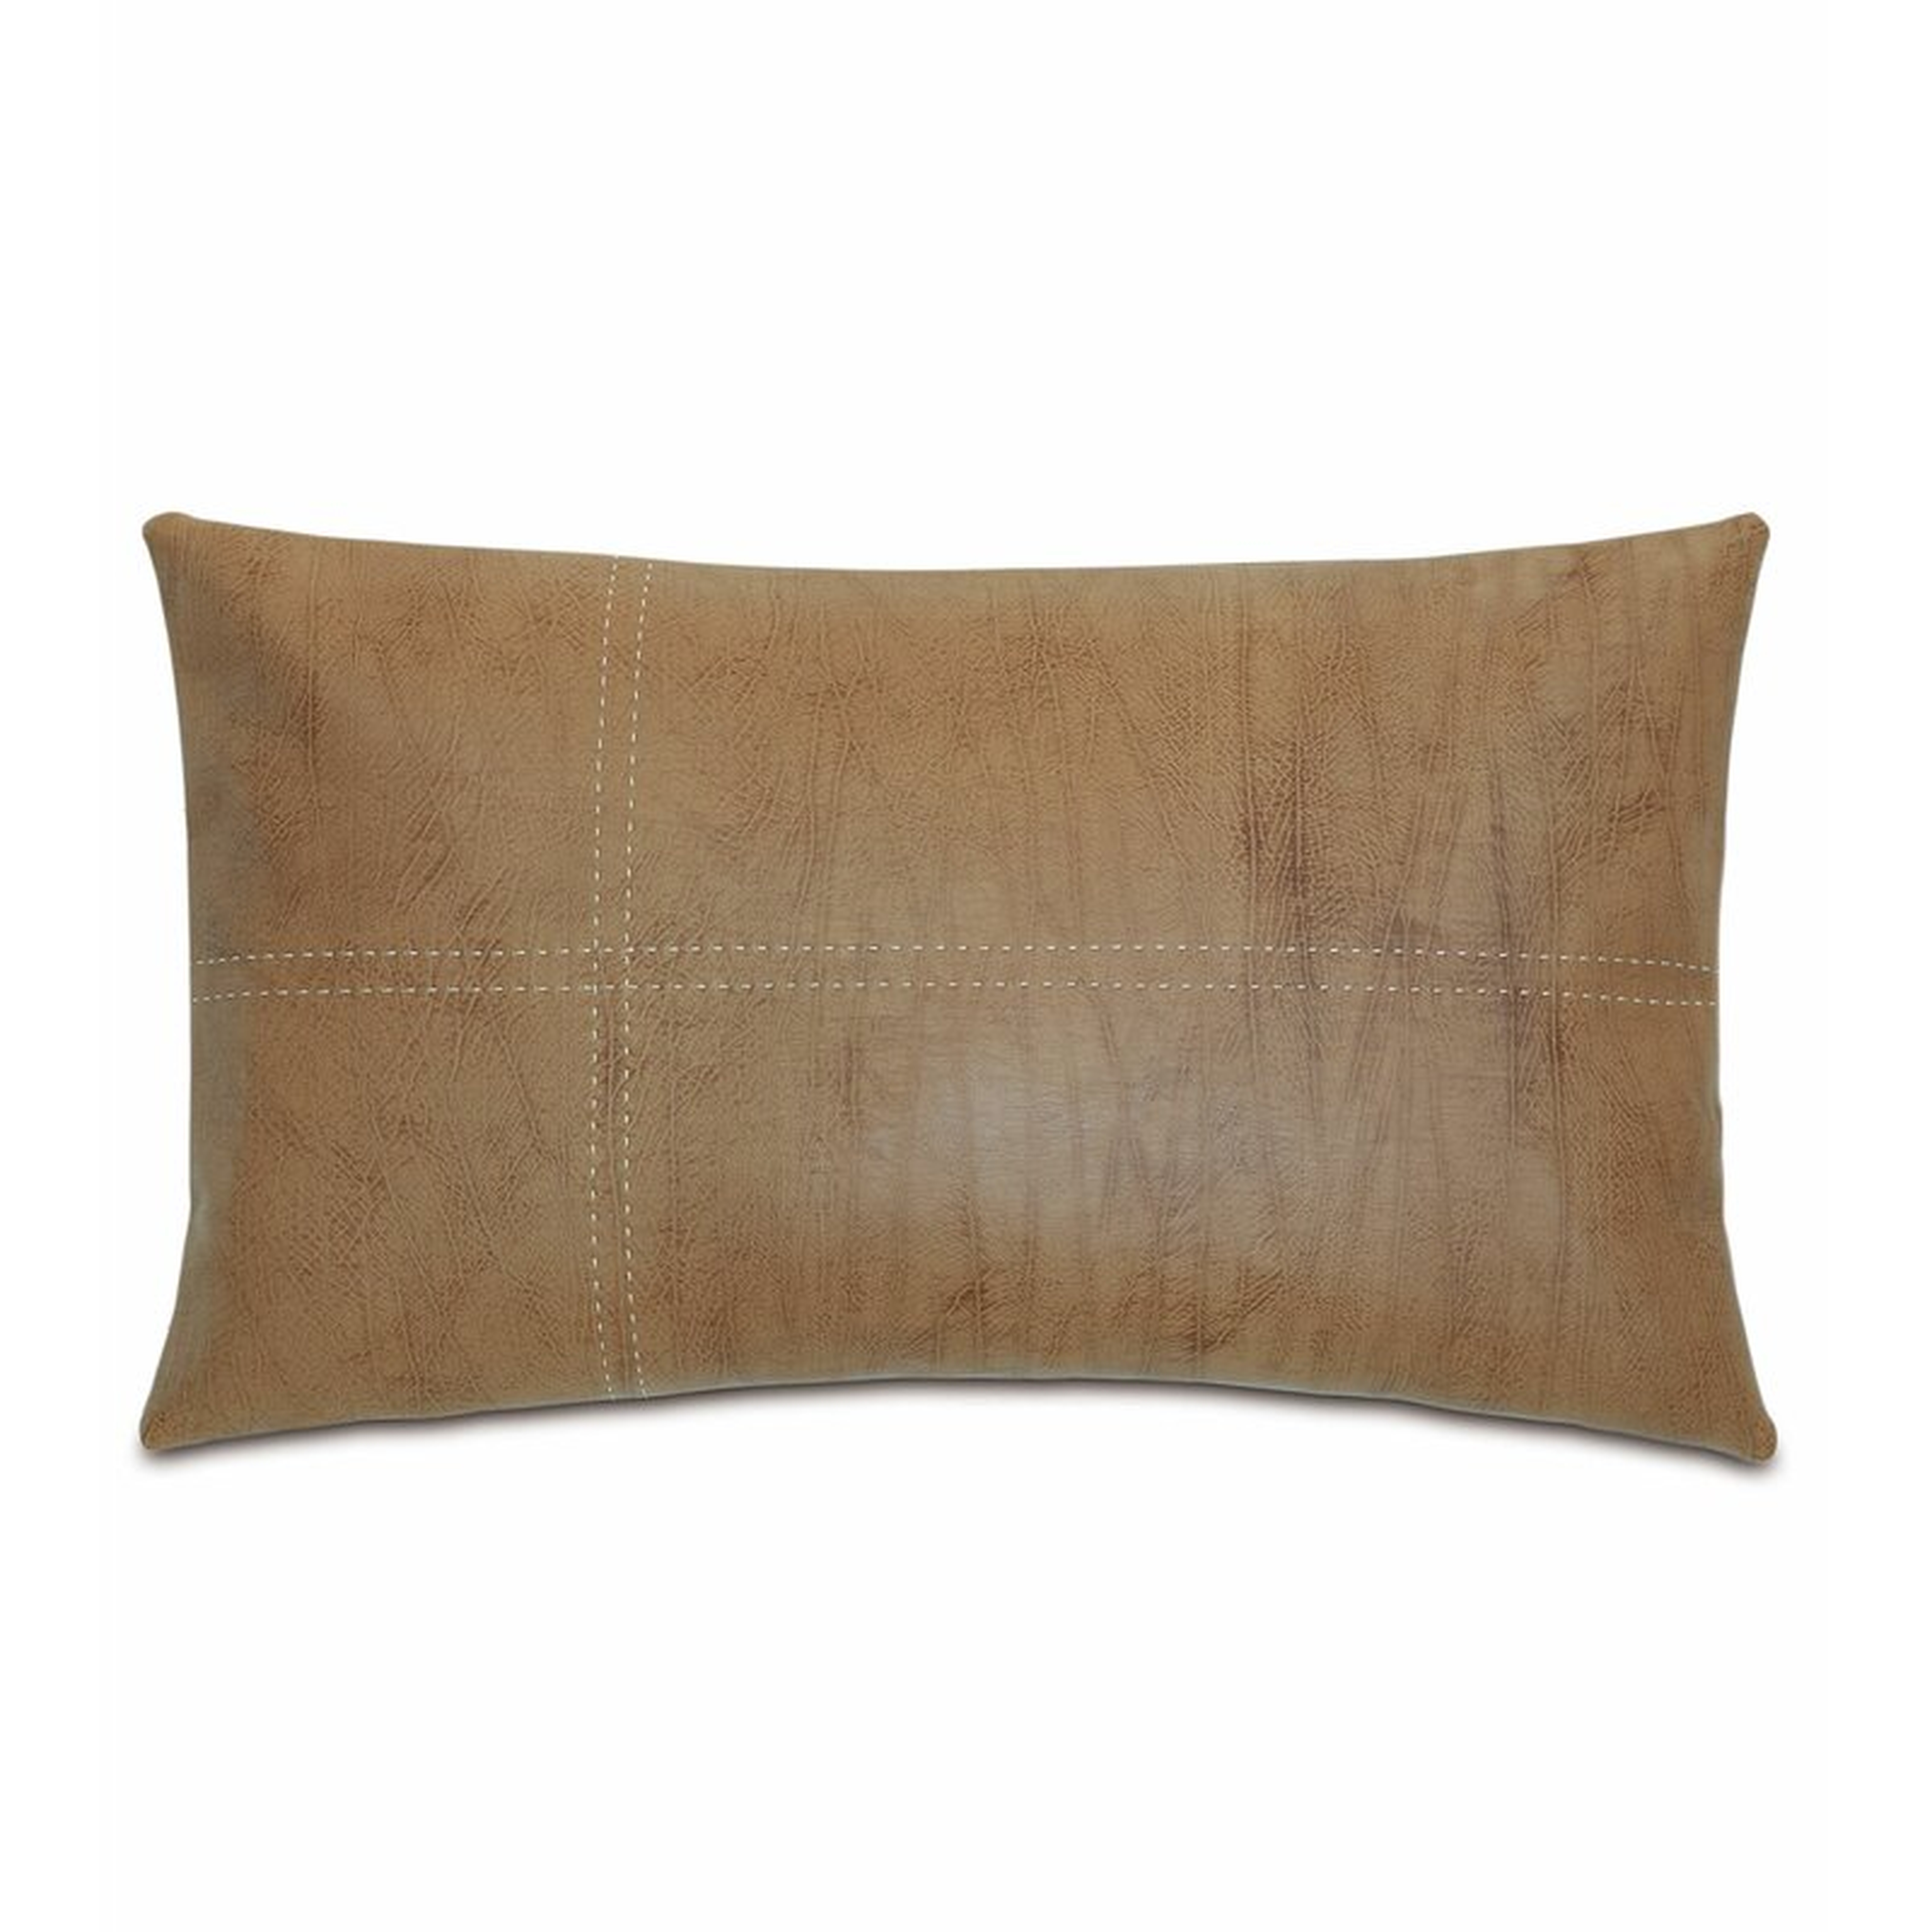 Eastern Accents Chalet Faux Leather Down Lumbar Pillow Cover & Insert - Perigold